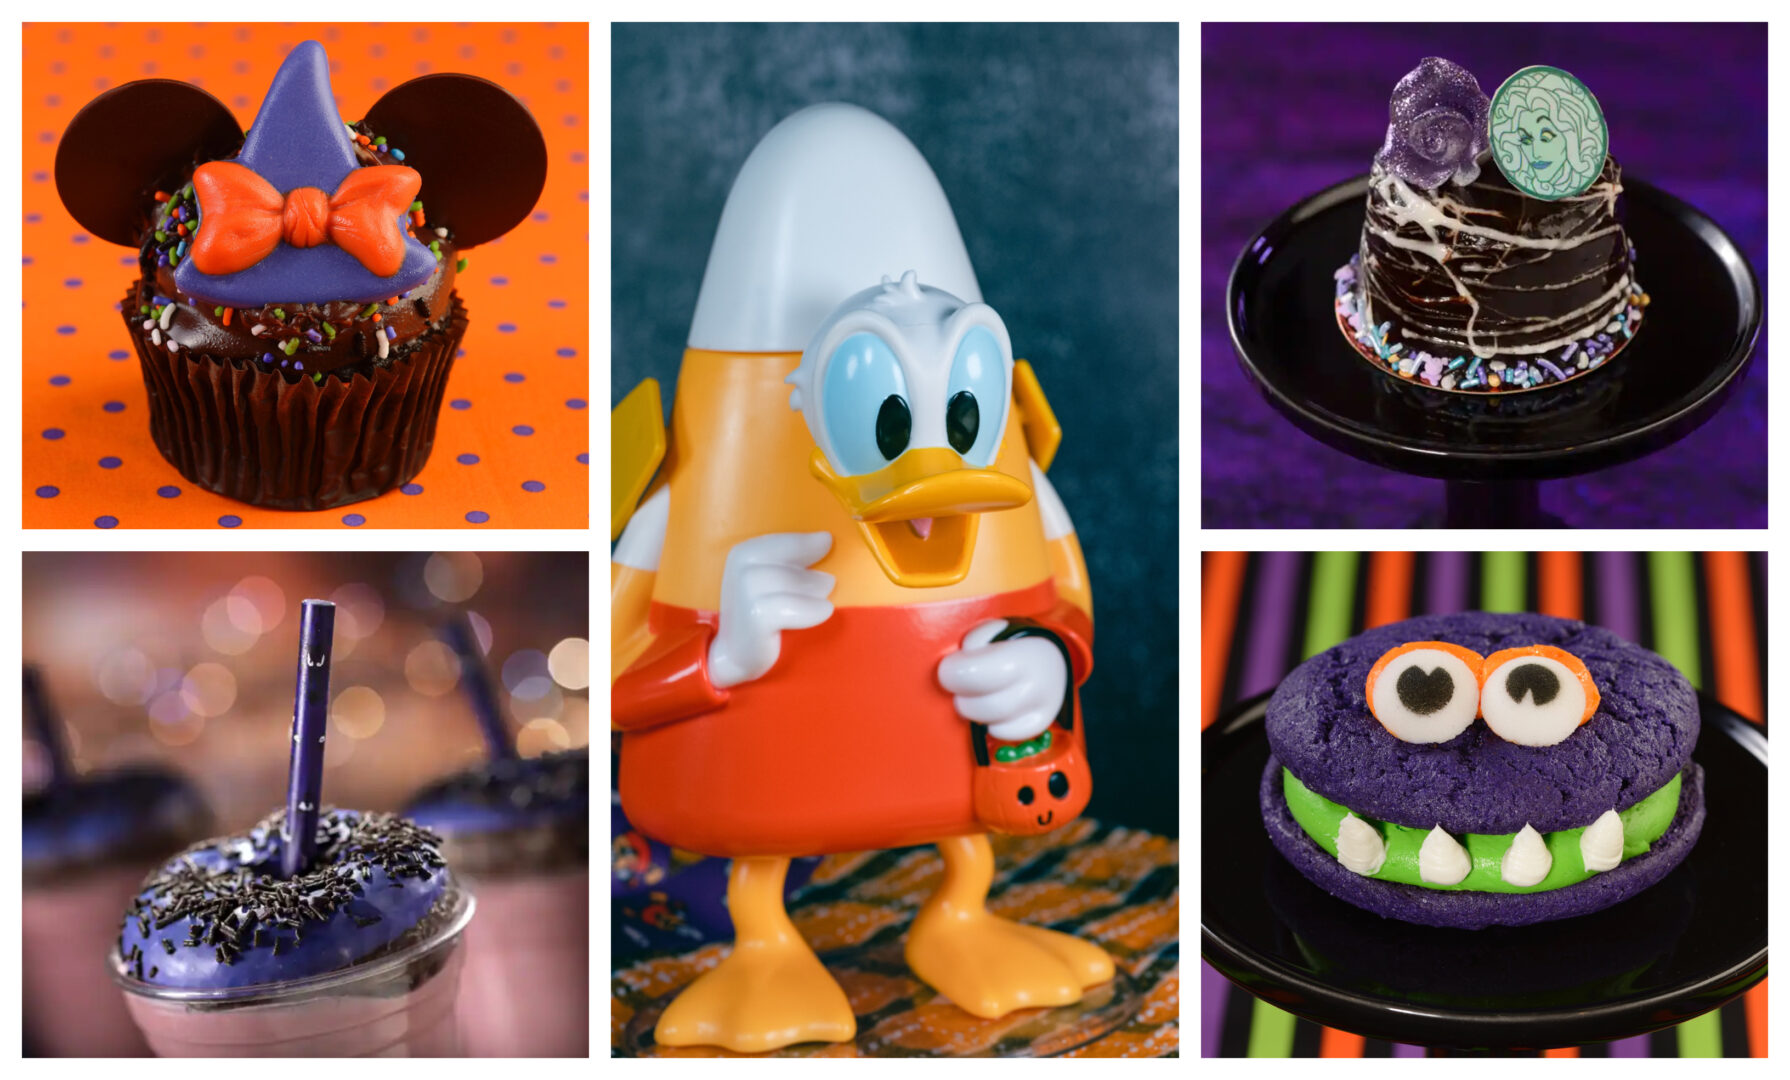 Celebrate #HalfwaytoHalloween with a First Look at these Halloween Food & Drinks Items